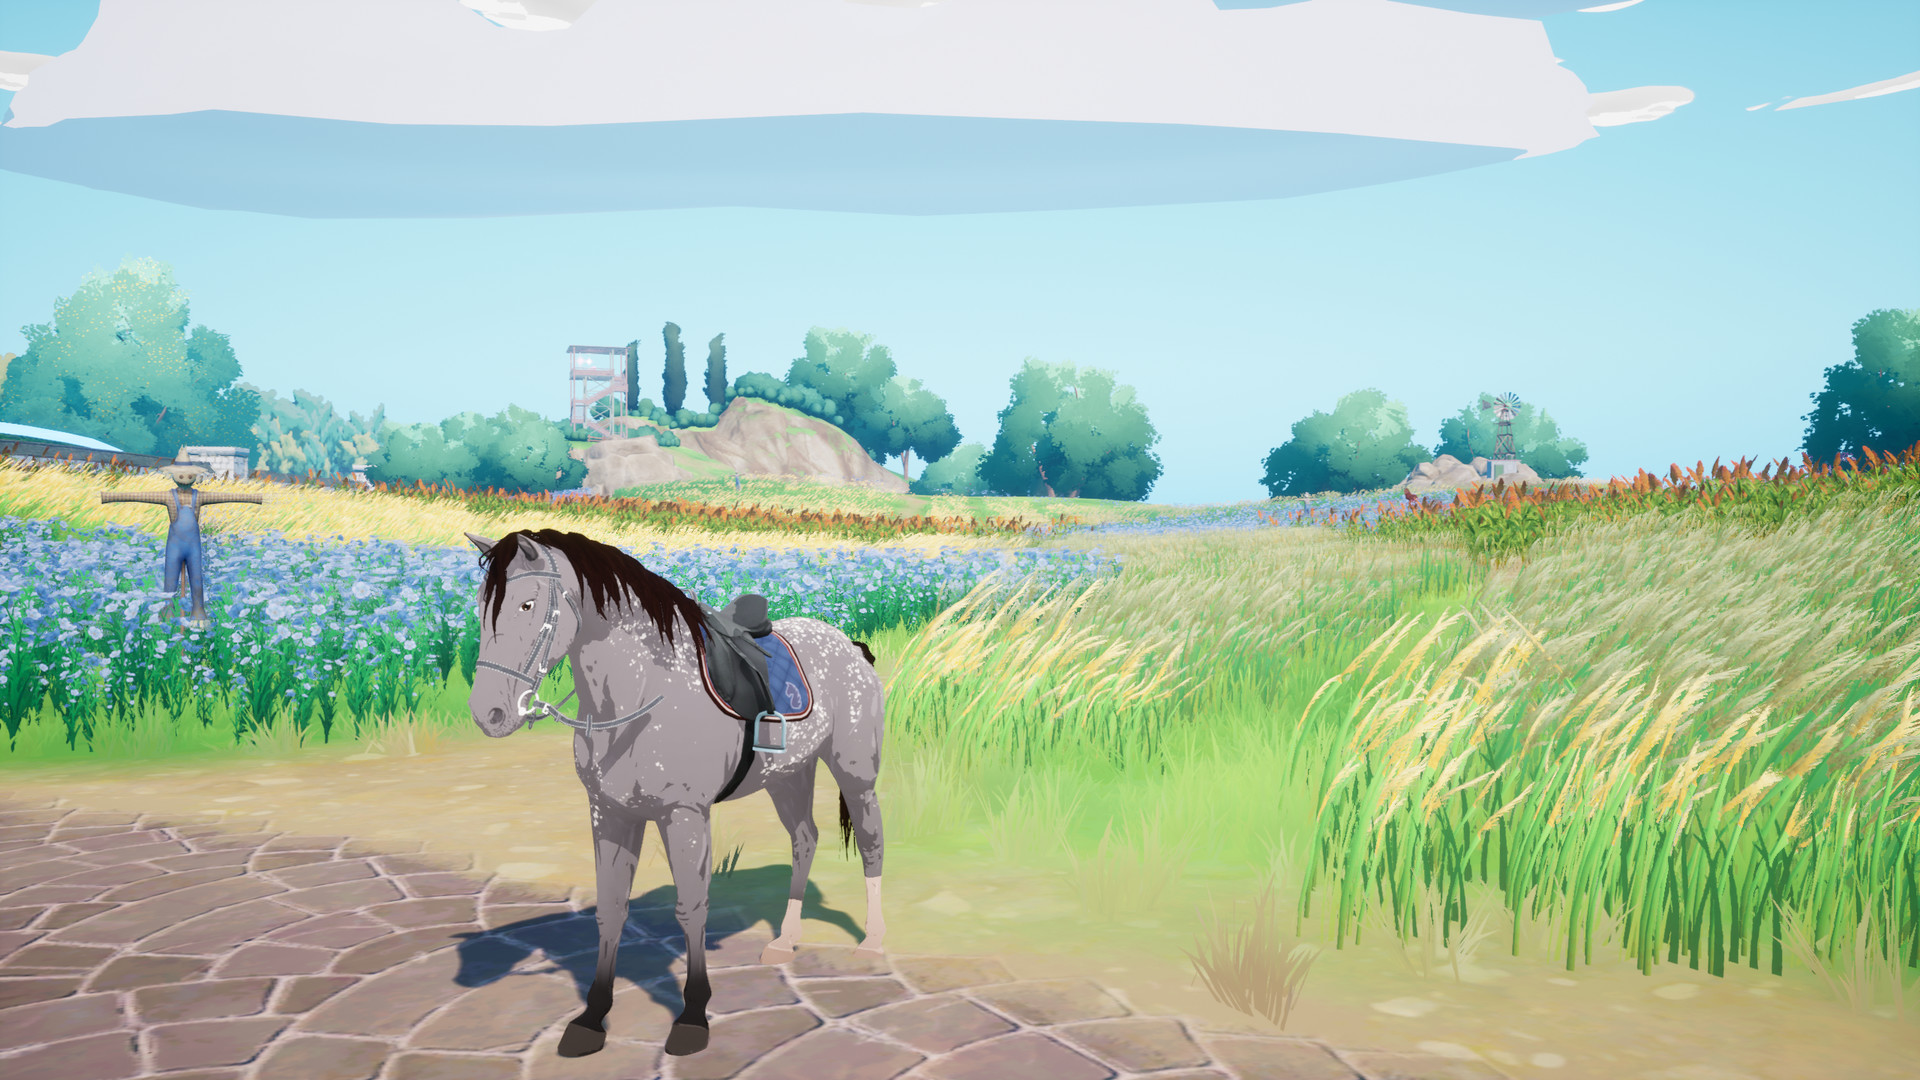 Horse Tales: Emerald Valley Ranch Steam Altergift